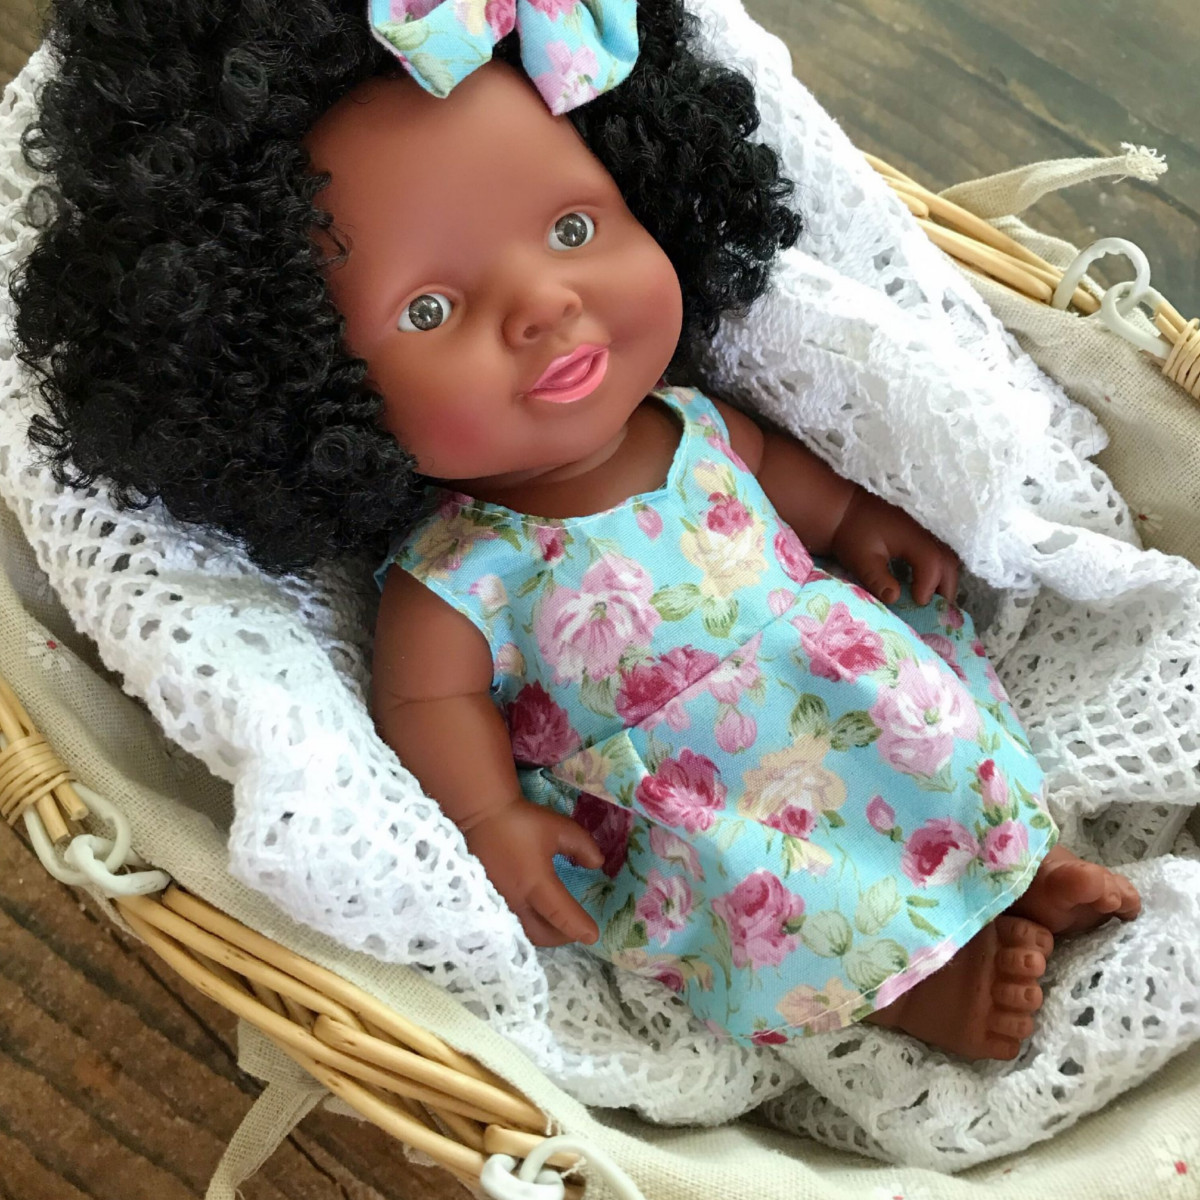 25CM-Cute-Soft-Silicone-Joint-Movable-Lifelike-Realistic-African-Black-Reborn-Baby-Doll-for-Kids-Gif-1733542-9